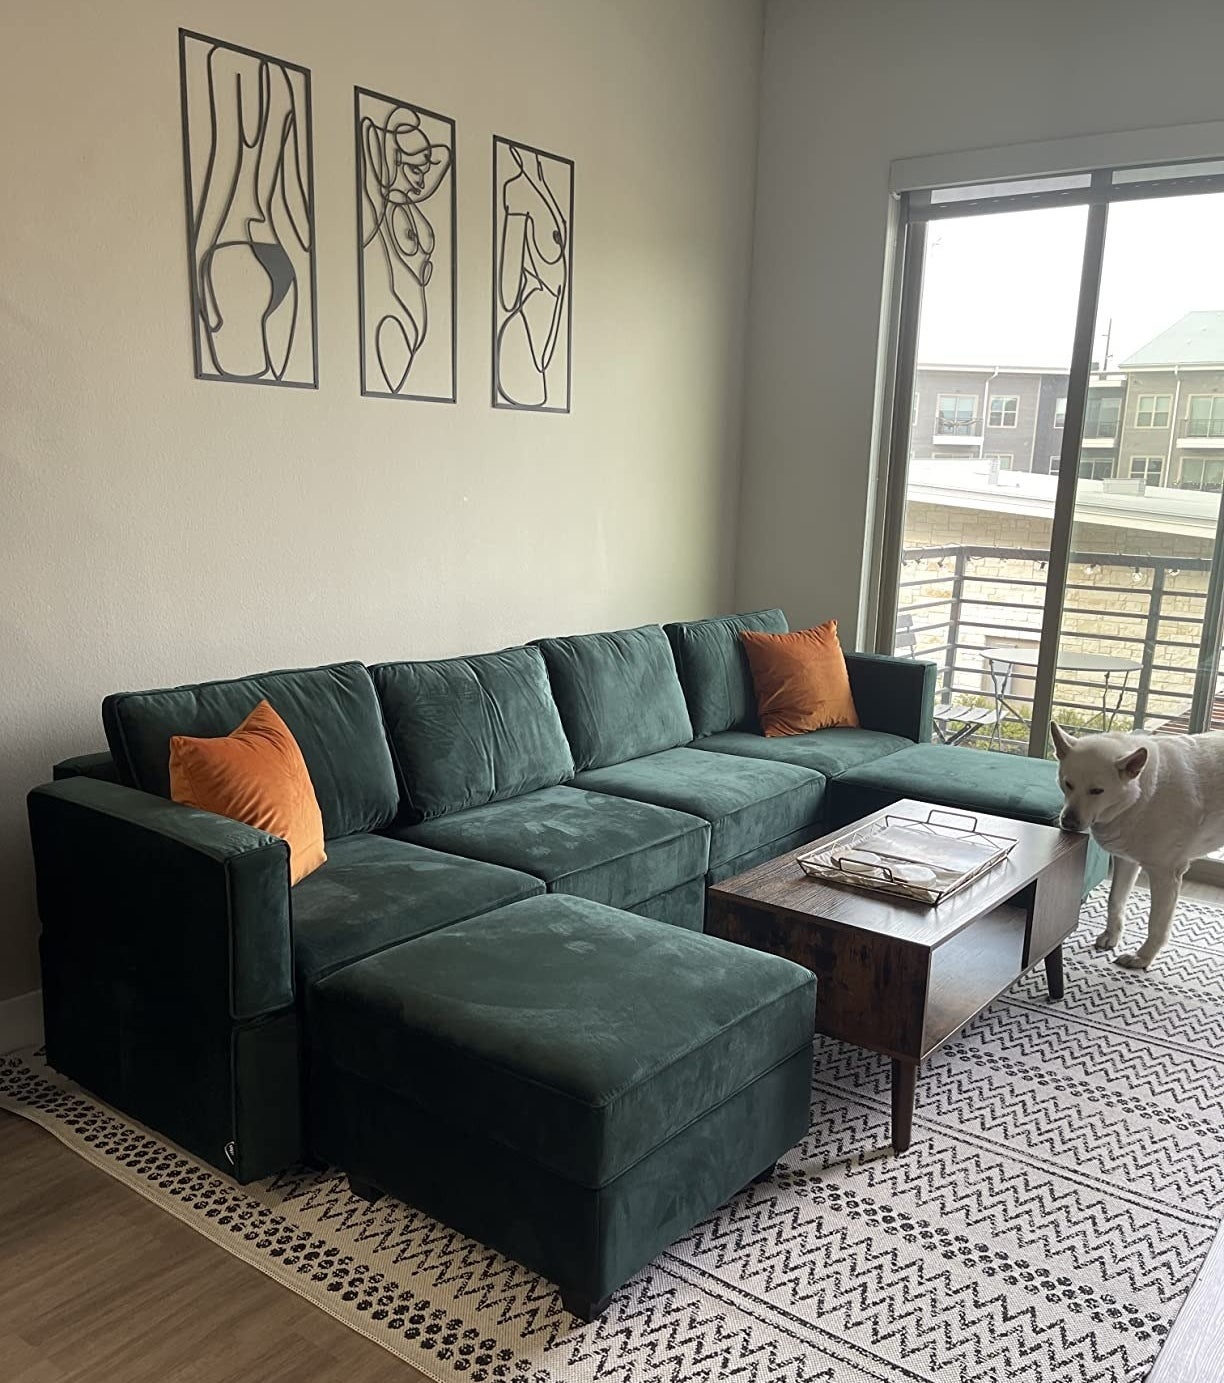 a reviewer photo of the green couch with a white dog next to it